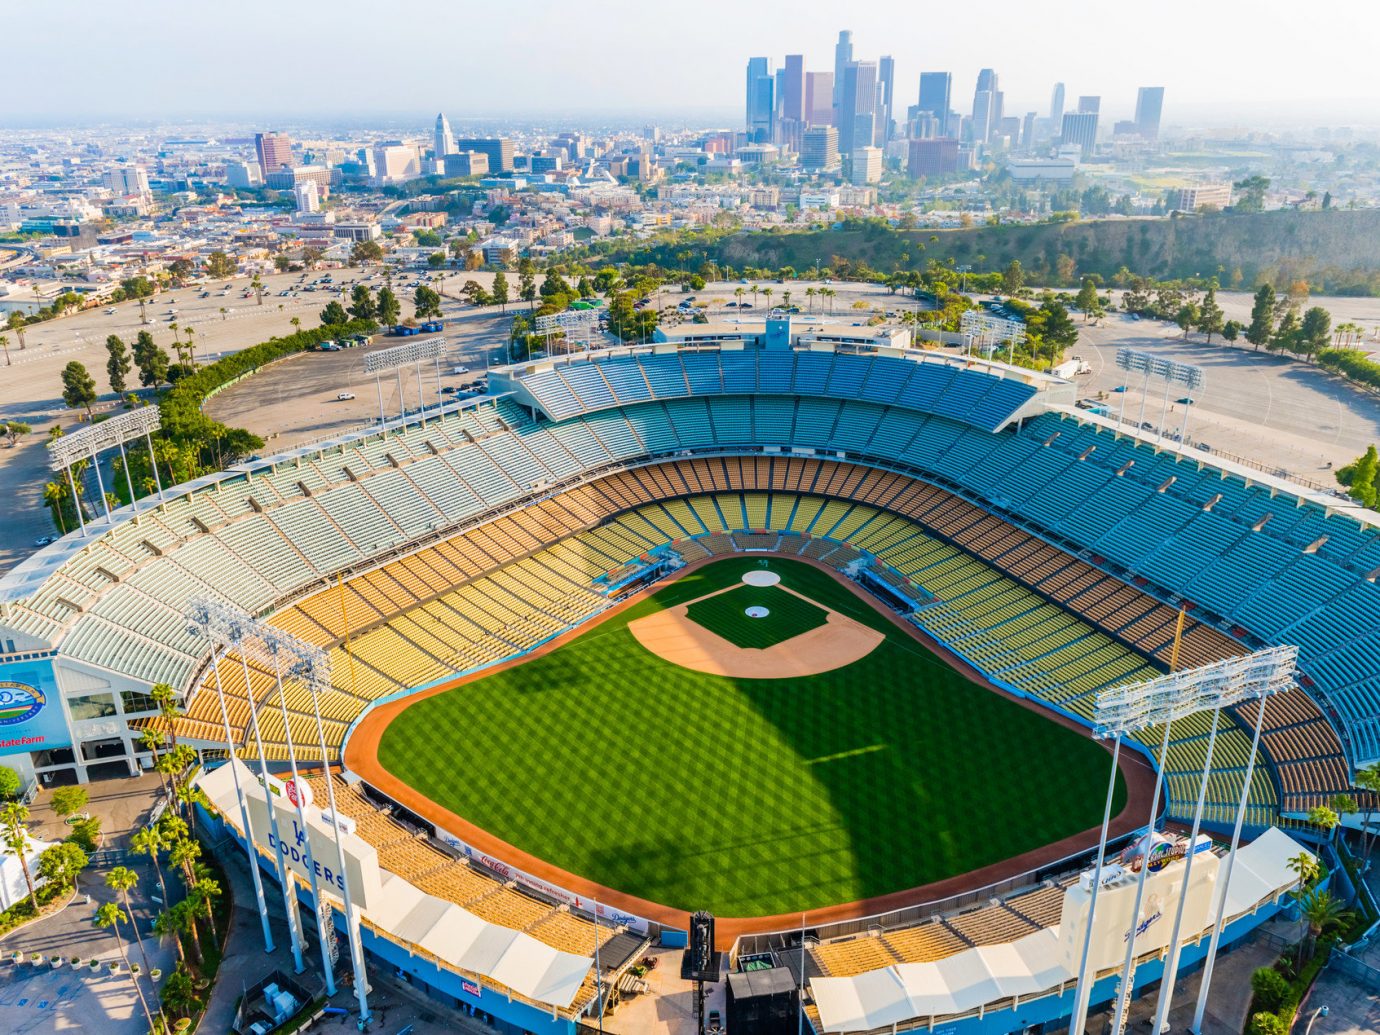 Offbeat sky structure outdoor geographical feature baseball park stadium building bird's eye view sport venue soccer specific stadium baseball field aerial photography City arena colorful